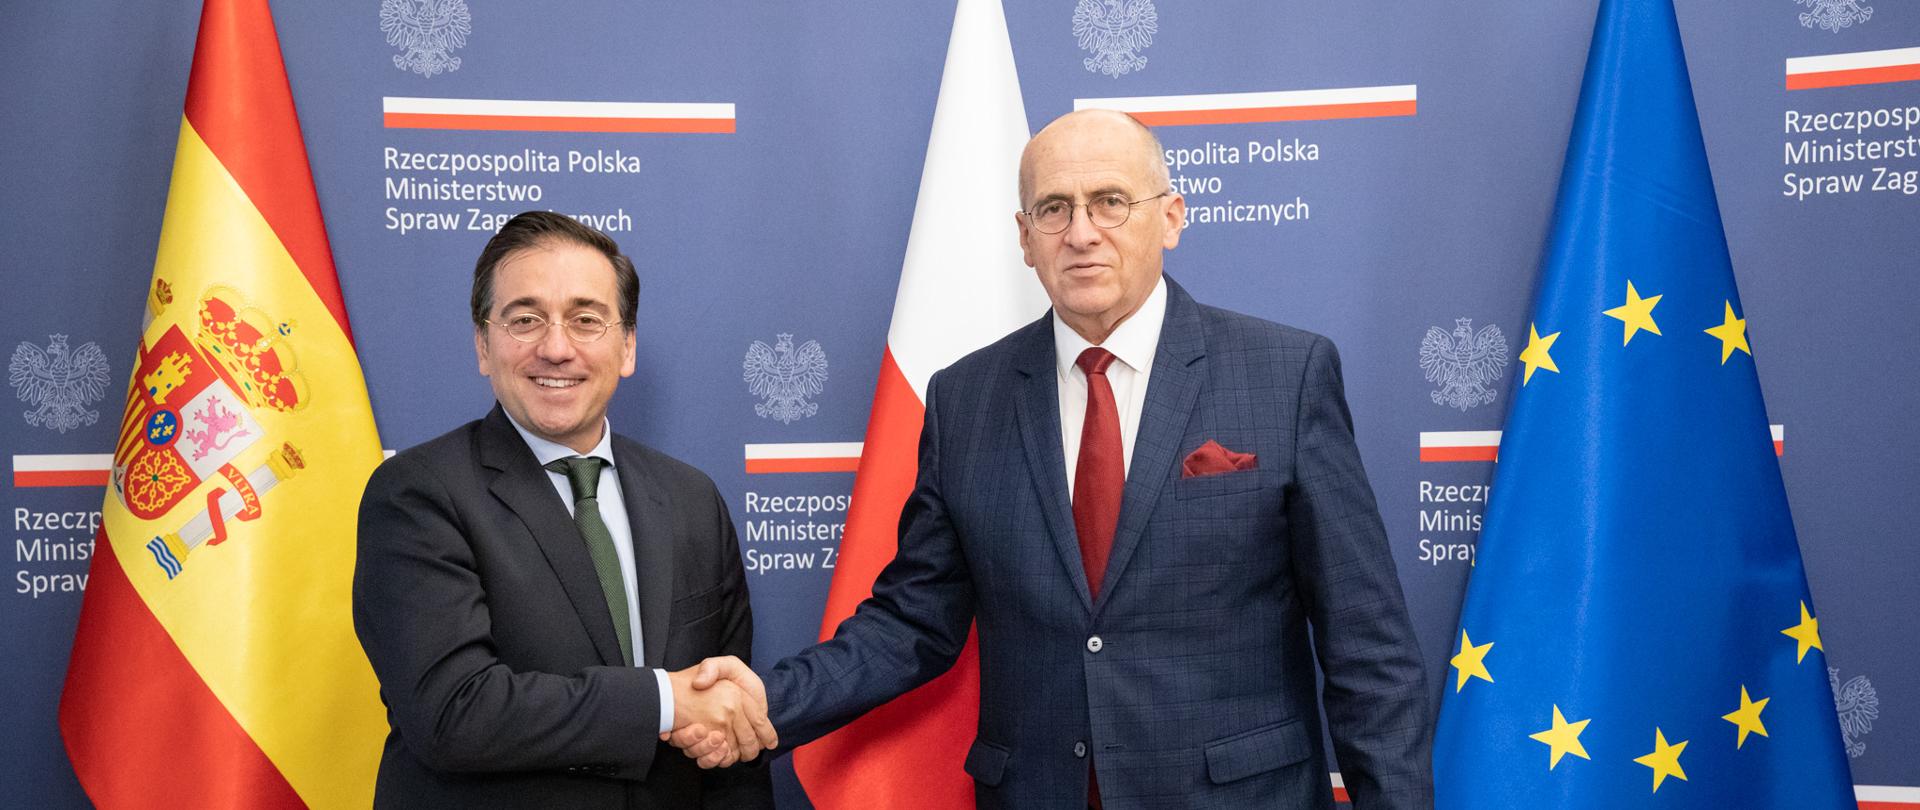 Foreign Ministers of Poland and Spain, Zbigniew Rau and José Manuel Albares Bueno